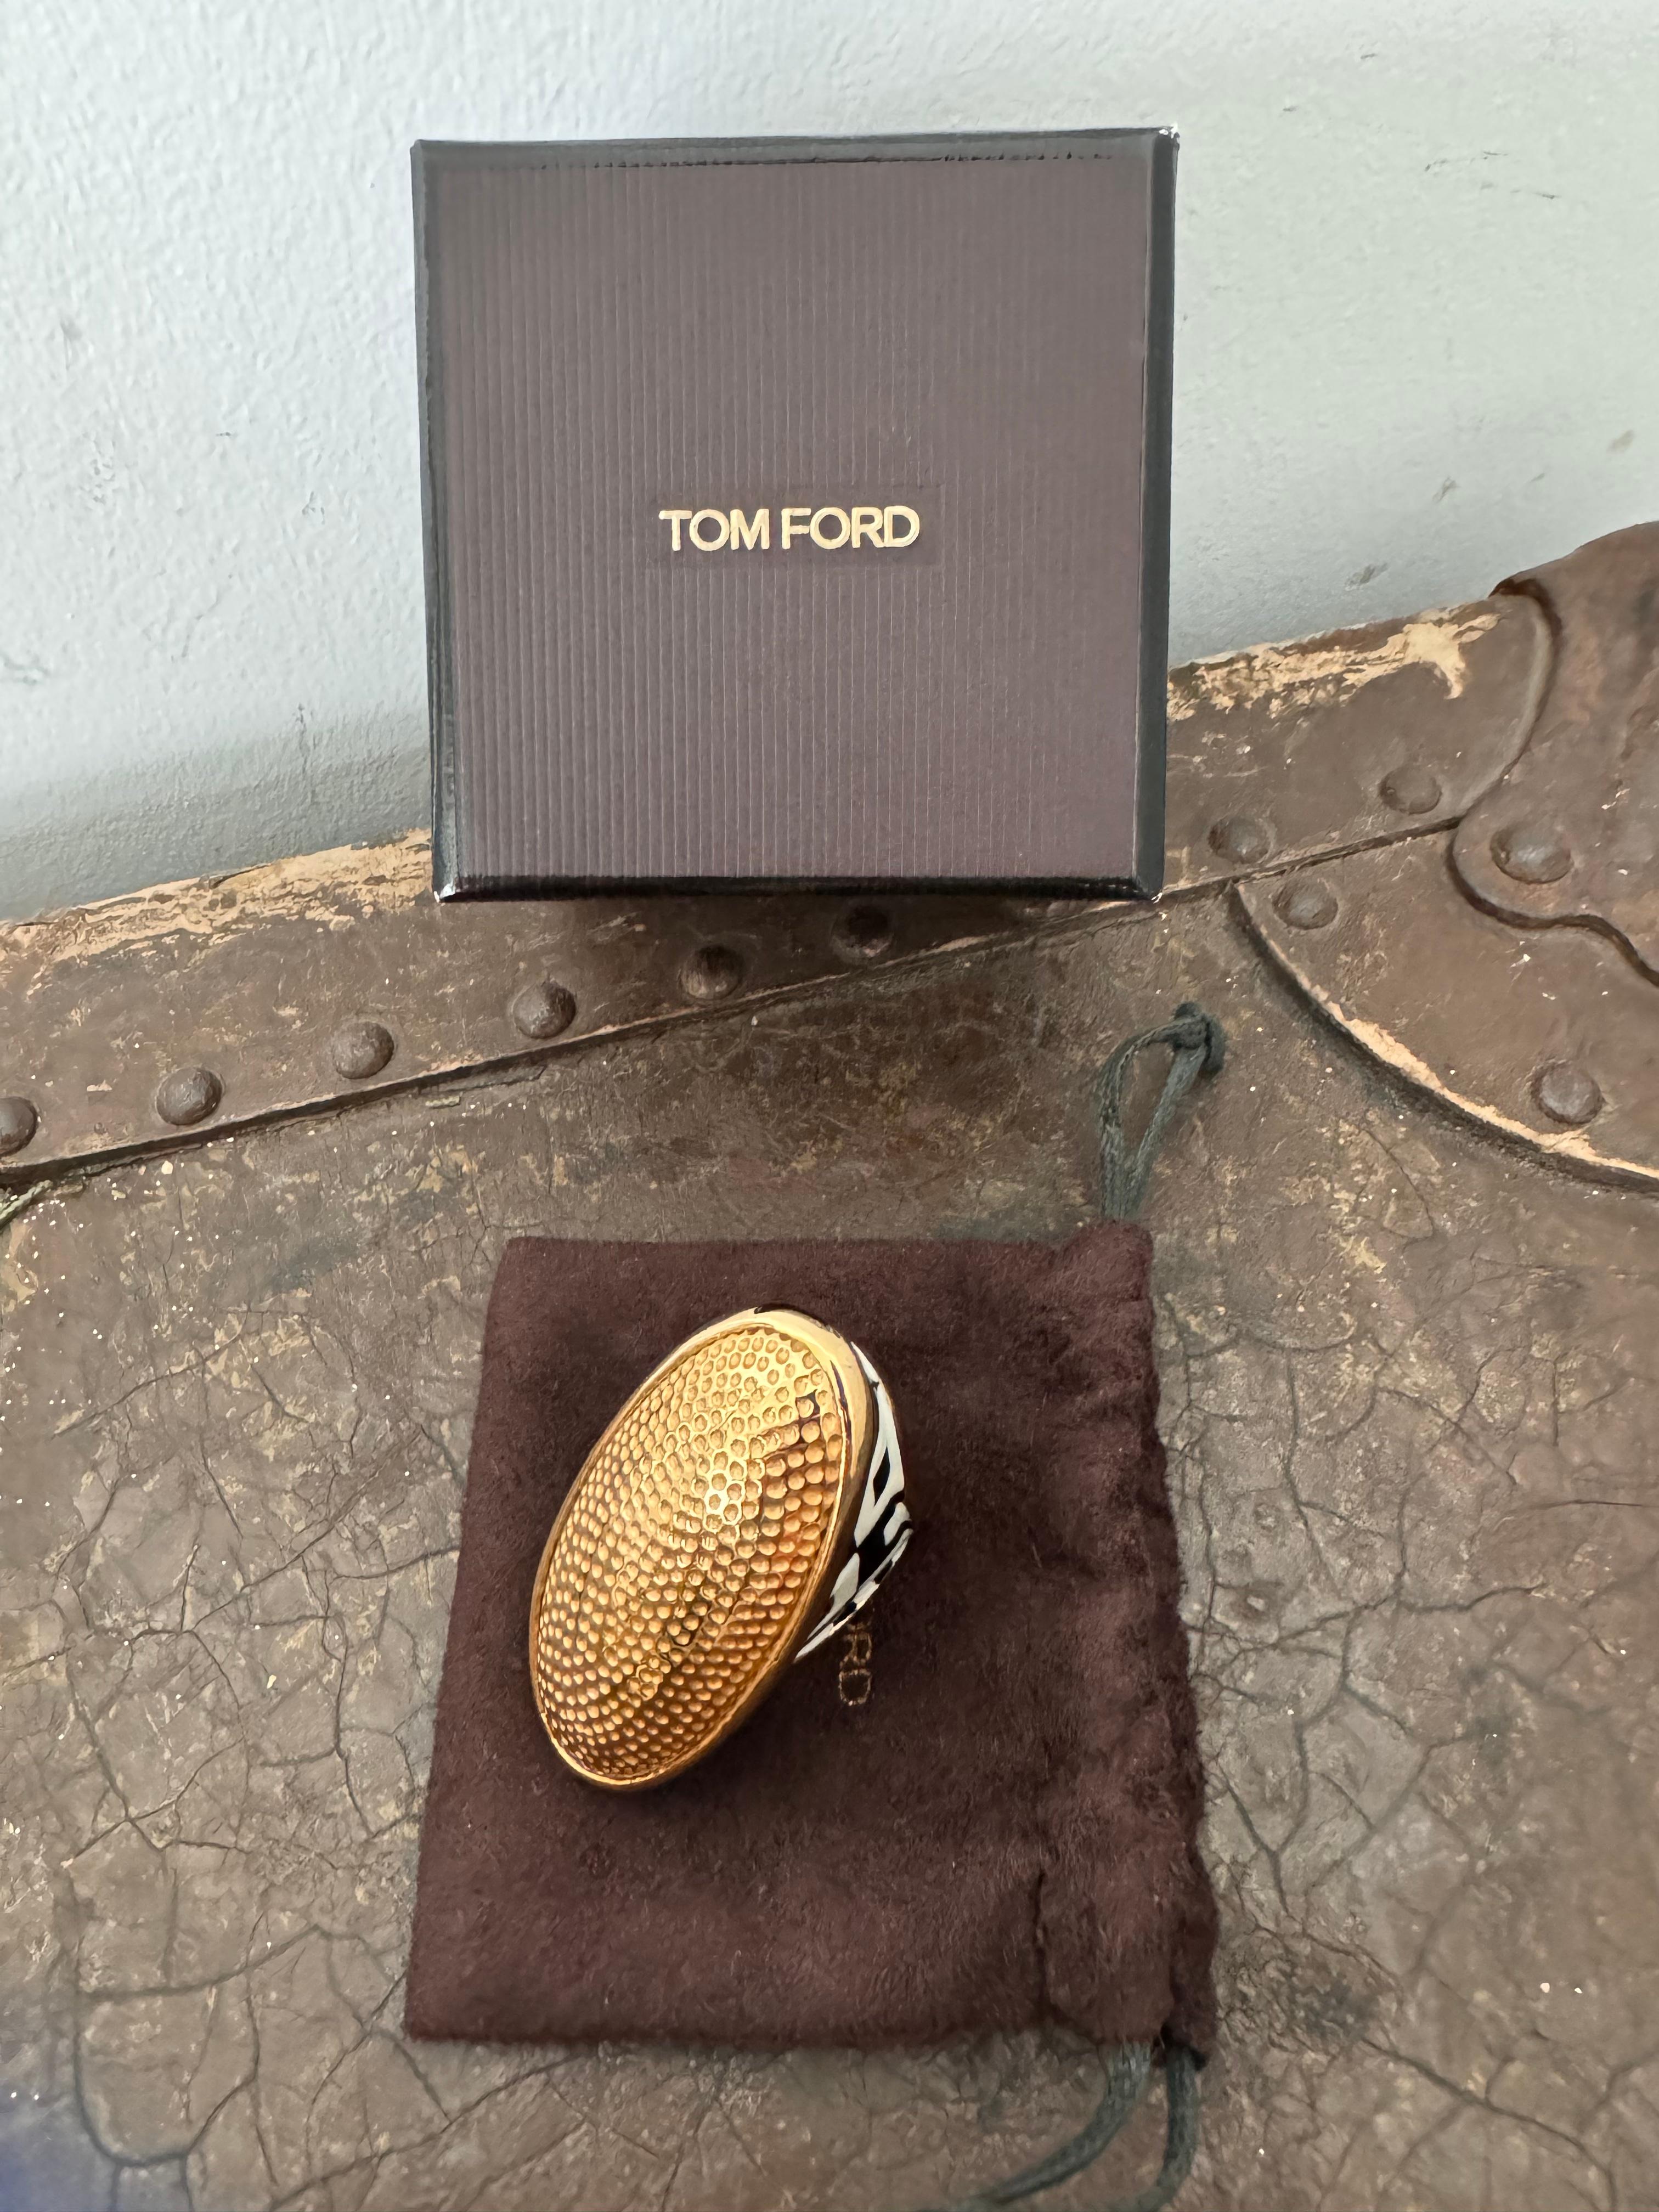 Elevate your jewelry collection with the striking elegance of the Tom Ford Black and White Enamel Cocktail Ring. This exquisite piece embodies the luxurious sophistication and bold design aesthetic for which Tom Ford is renowned, making it a